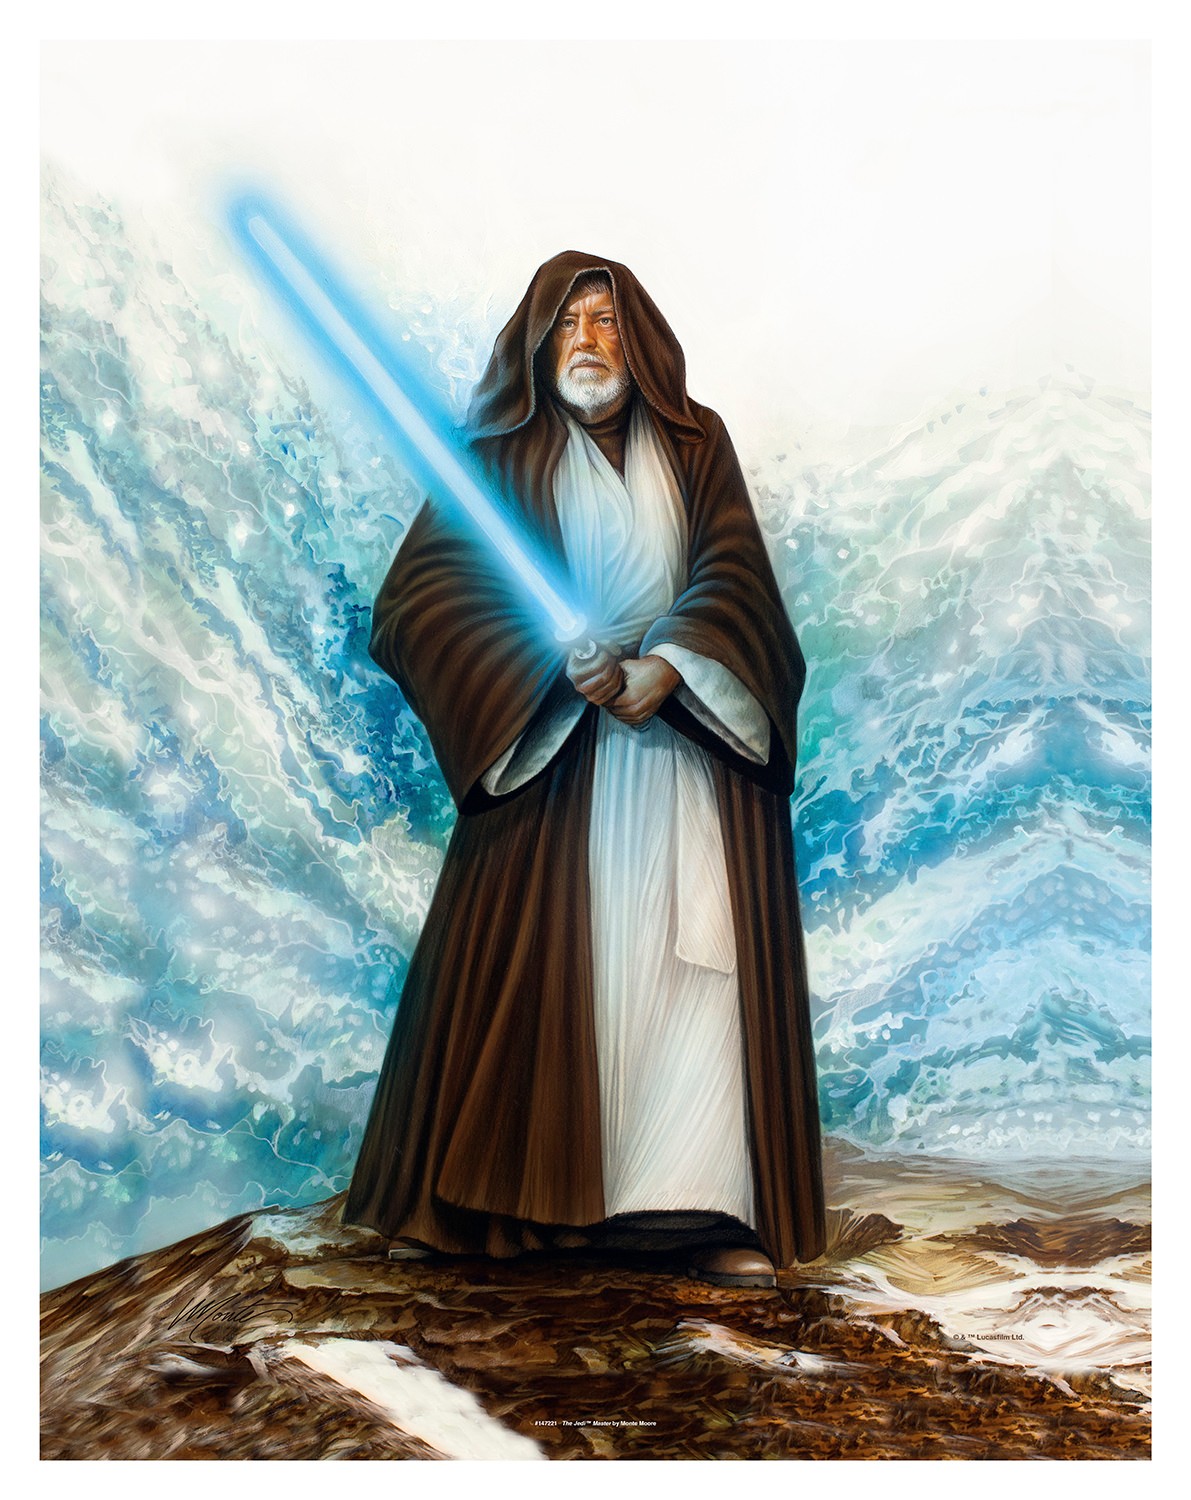 The Jedi Master™ Art Print by Art Brand Studios | Sideshow Collectibles